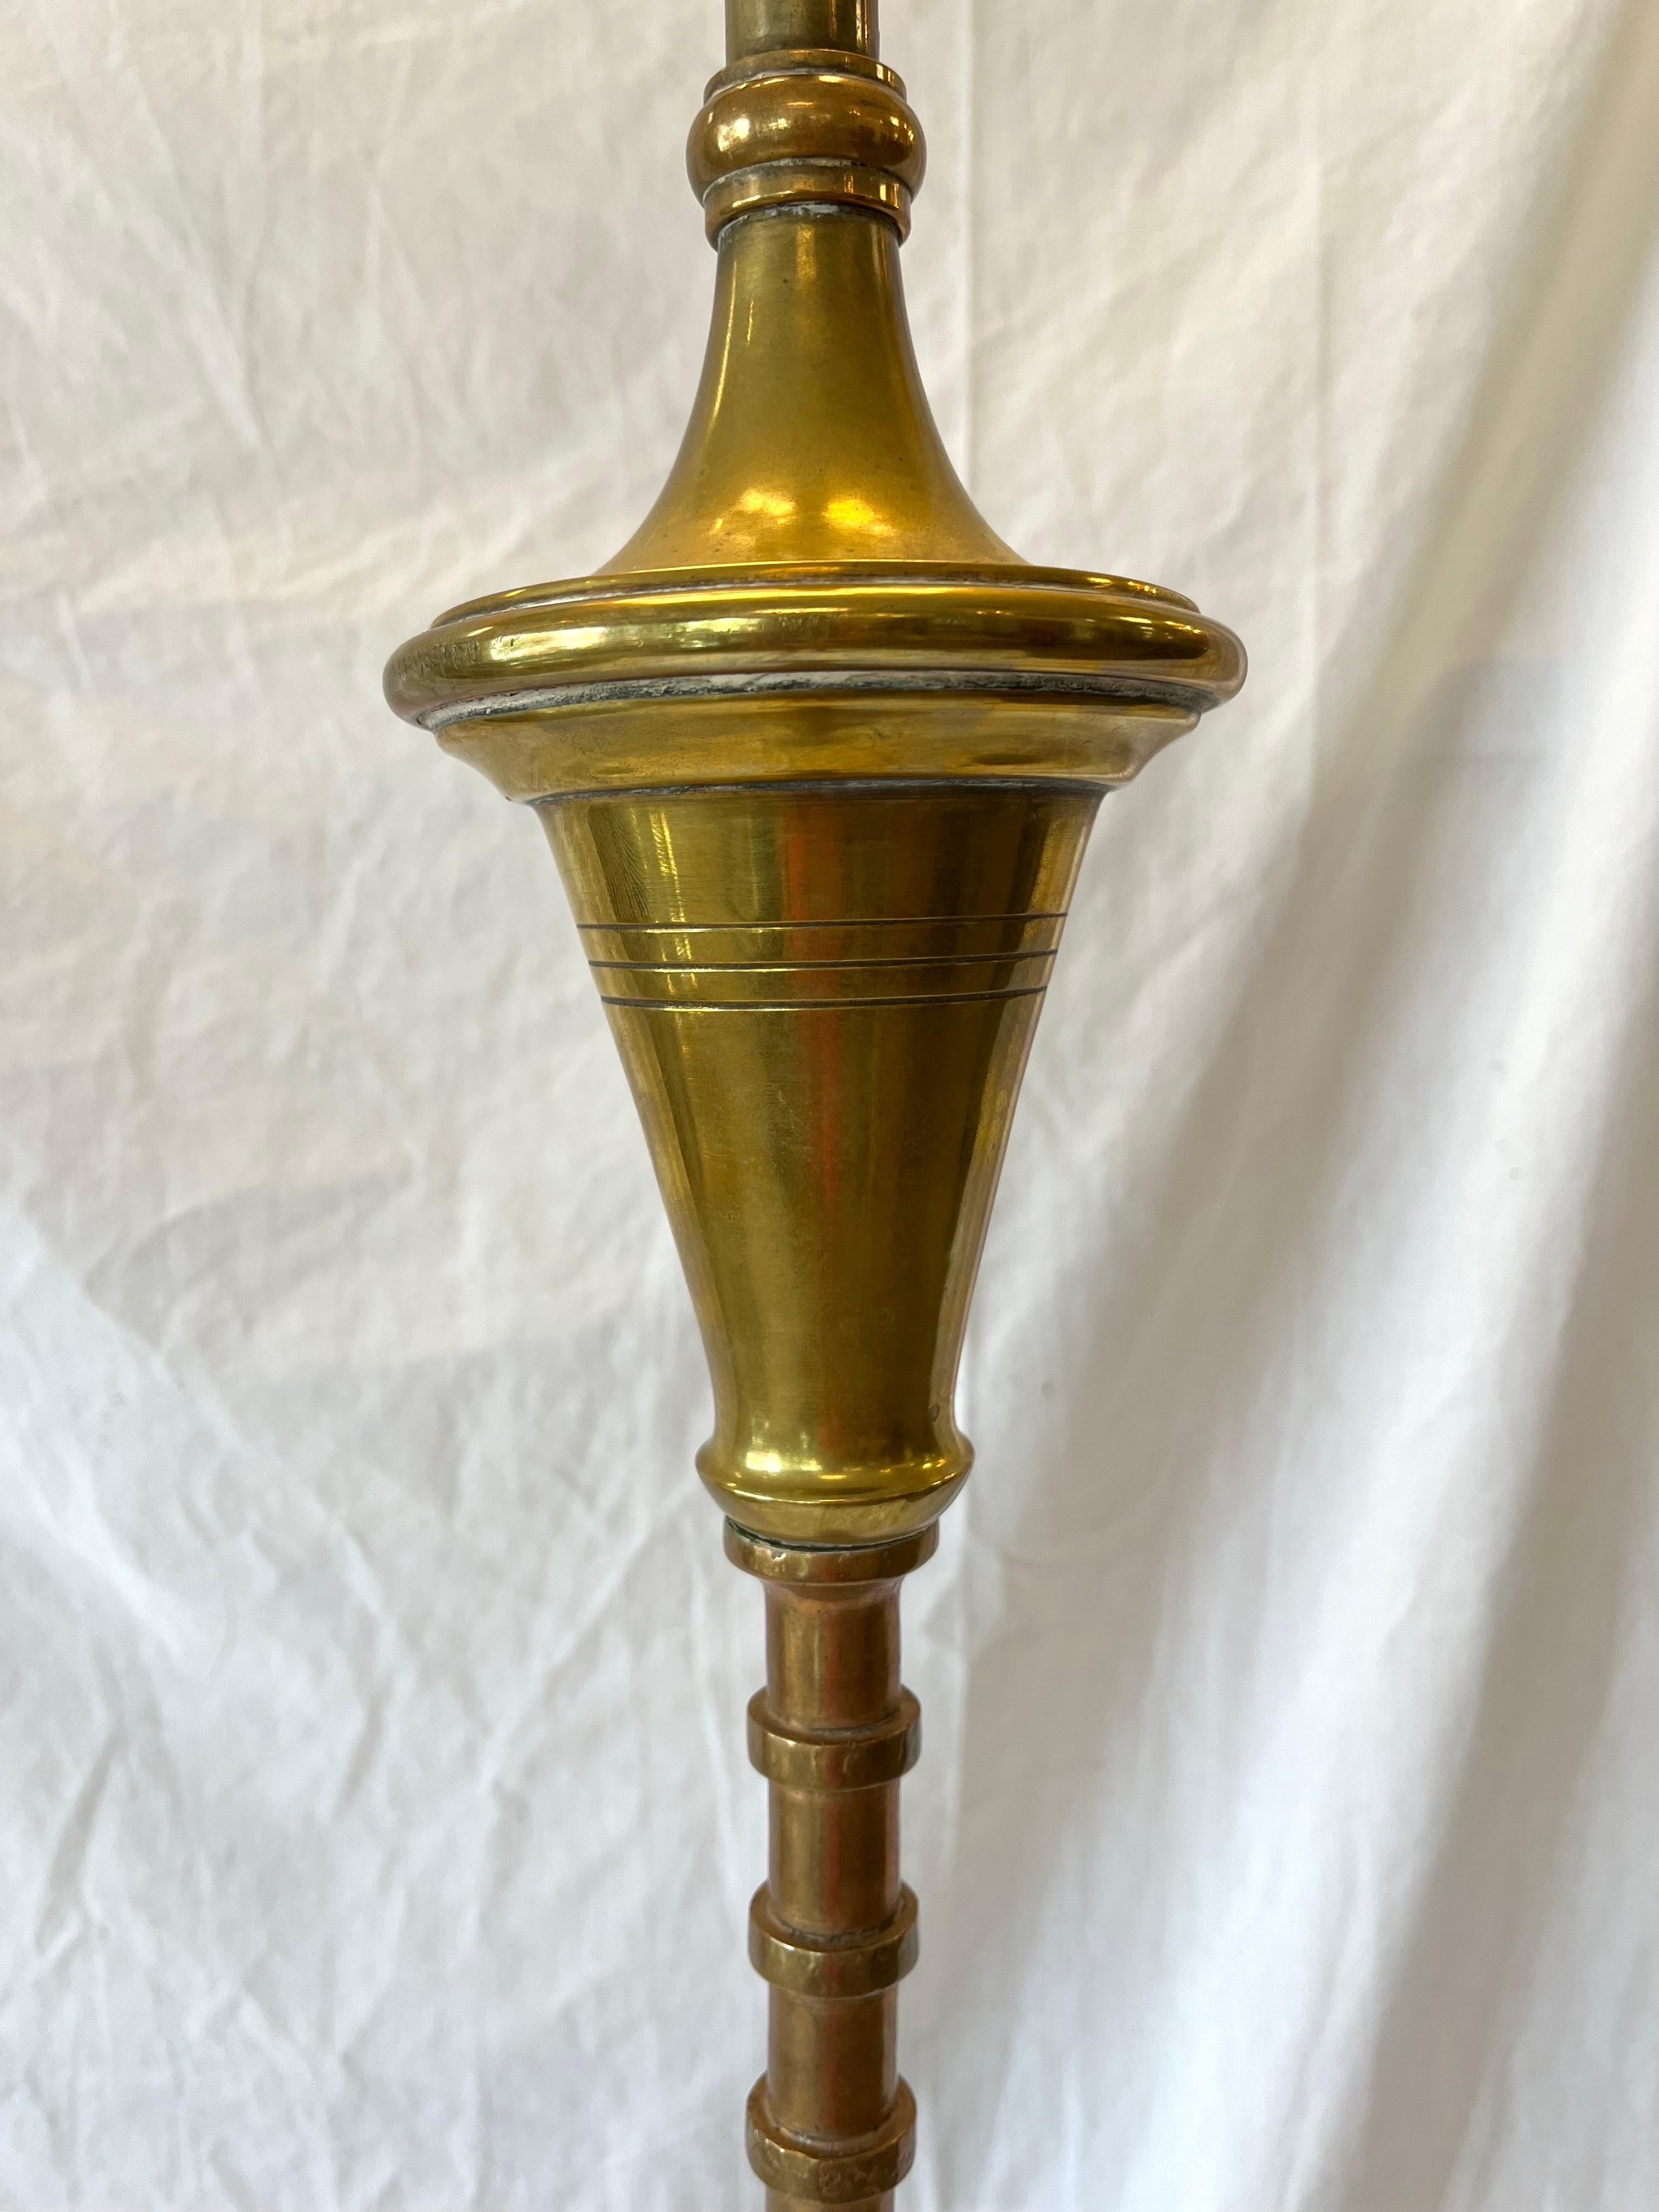 An ornate antique floor lamp. Intricate designs executed in a variety of mixed metals, copper, brass, adorn this slender and beautiful floor lamp. The base showcases the variety of mixed metal as well as the prowess, skill and artistry of the